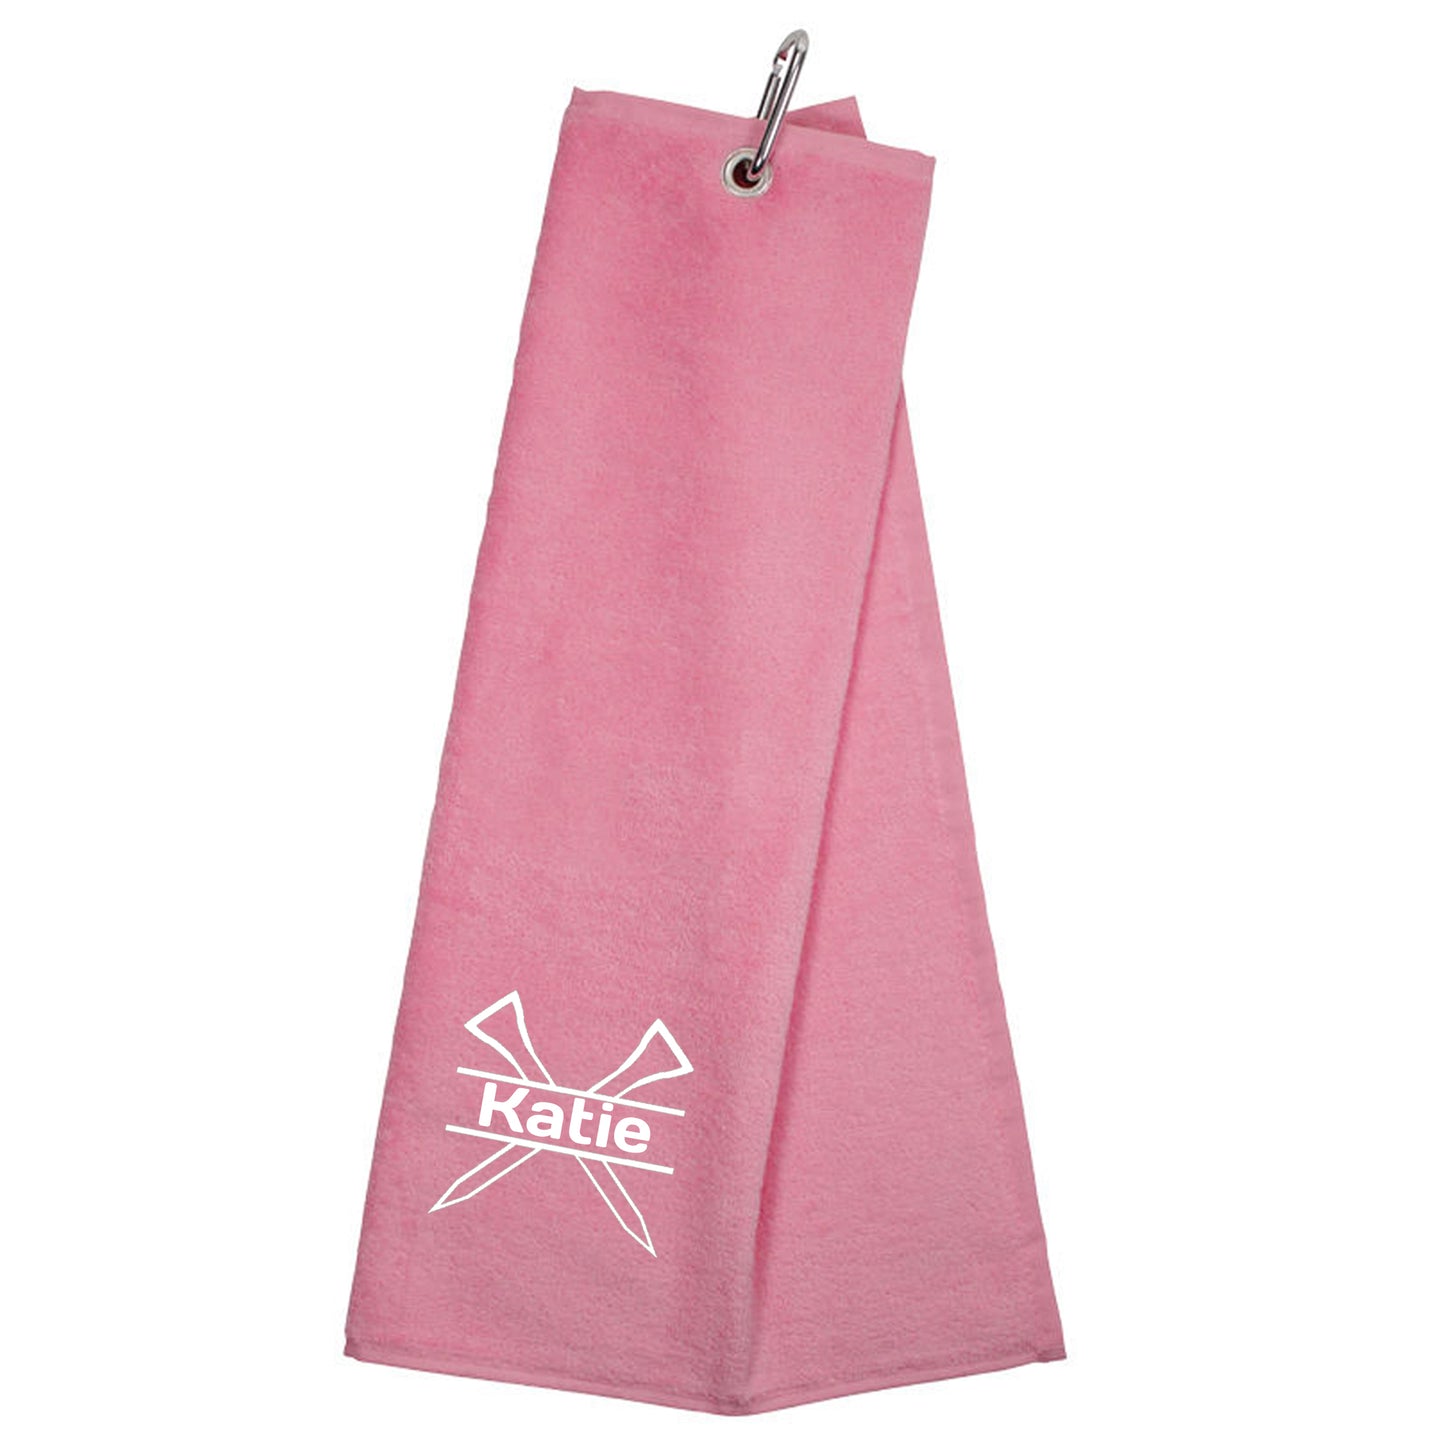 Personalised Embroidered Tri Fold GOLF Towel Trifold Towel with Carabiner Clip  - Always Looking Good - Pink  